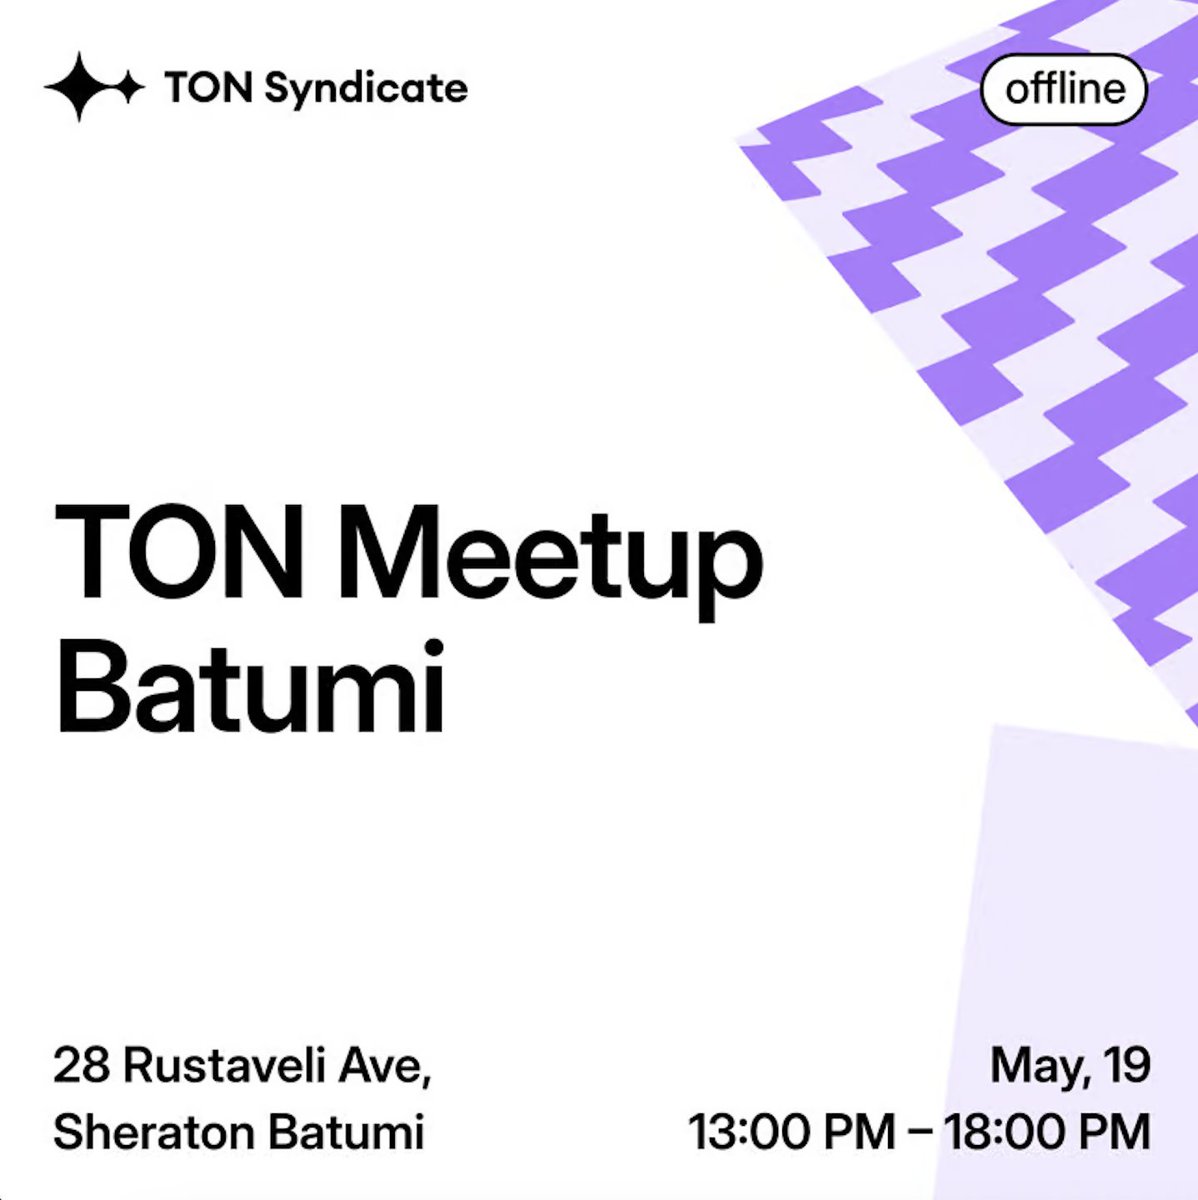 Join me: 1st #TONMeetup in Batumi!
📌 19.05 at Sheraton Batumi Hotel
🔗 #blockchain world with keynotes, projects and networking!
🔥 Limited spots, register lu.ma/tonbatumi   #CryptoMeetup
💬 DM t.me/elivendima for speaker slots!
#Web3 #CryptoEvent #TechEvent